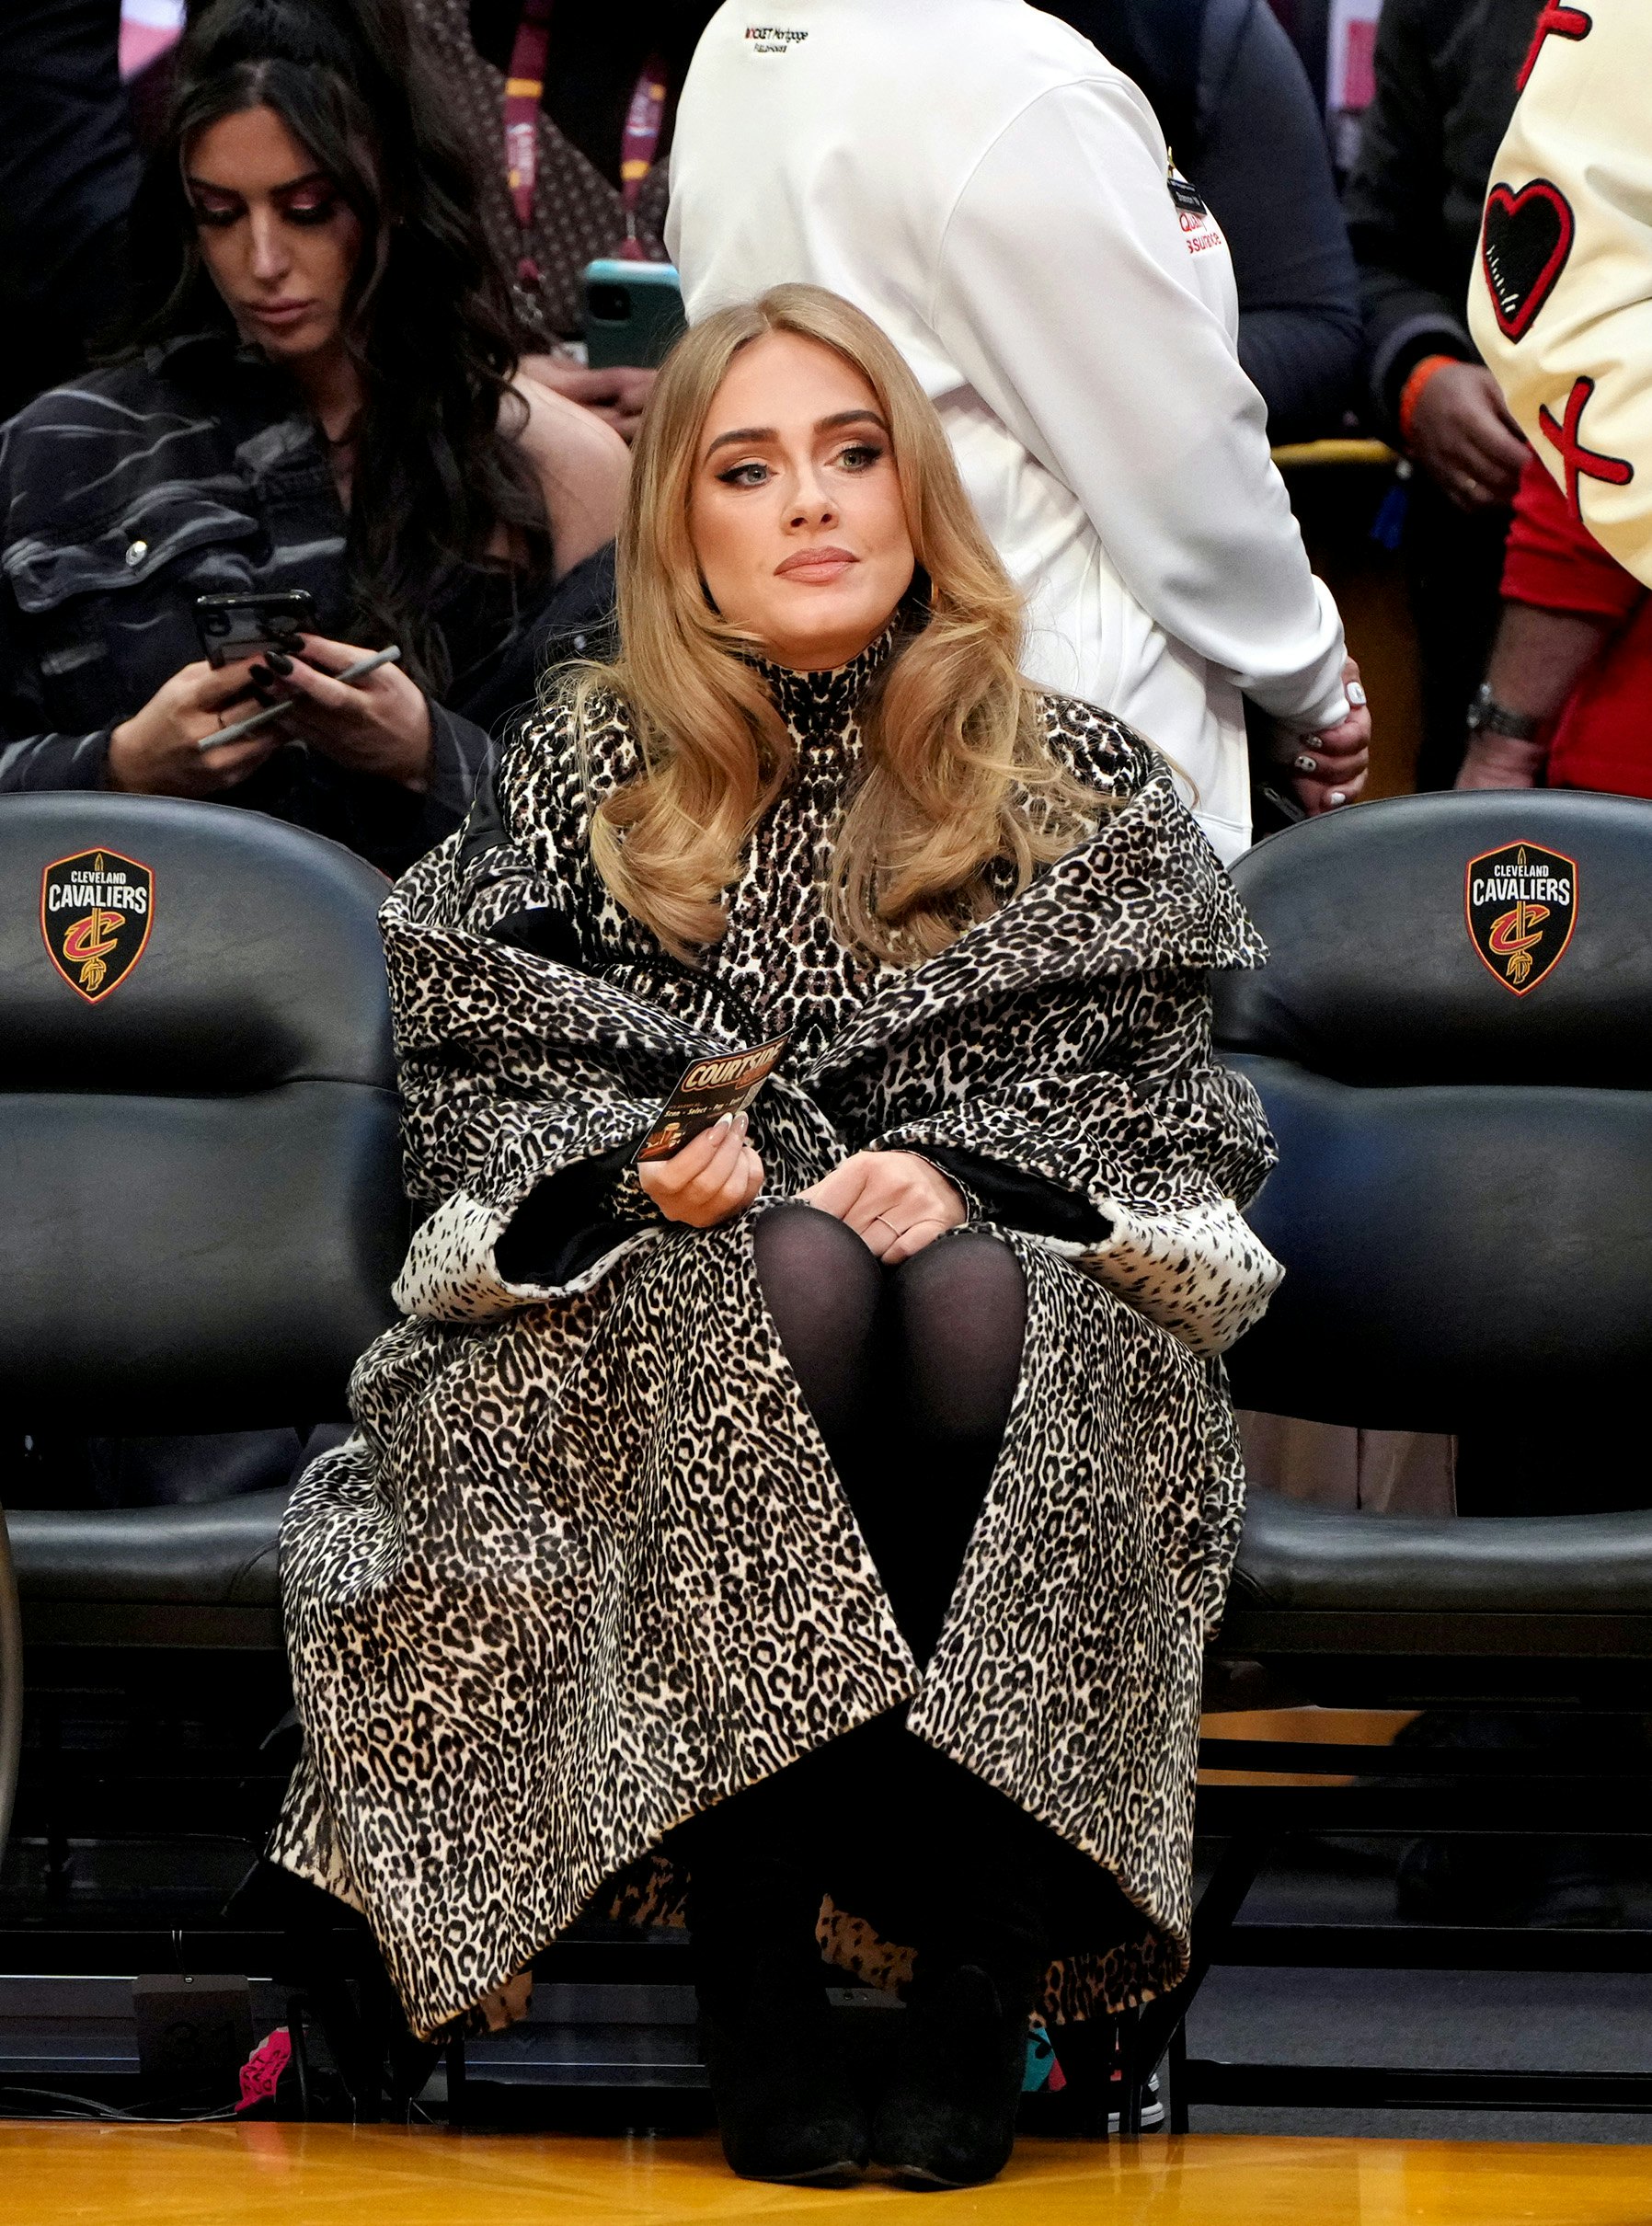 Adele Nailed Courtside Fashion In A Leather Outfit  Louis Vuitton Coat